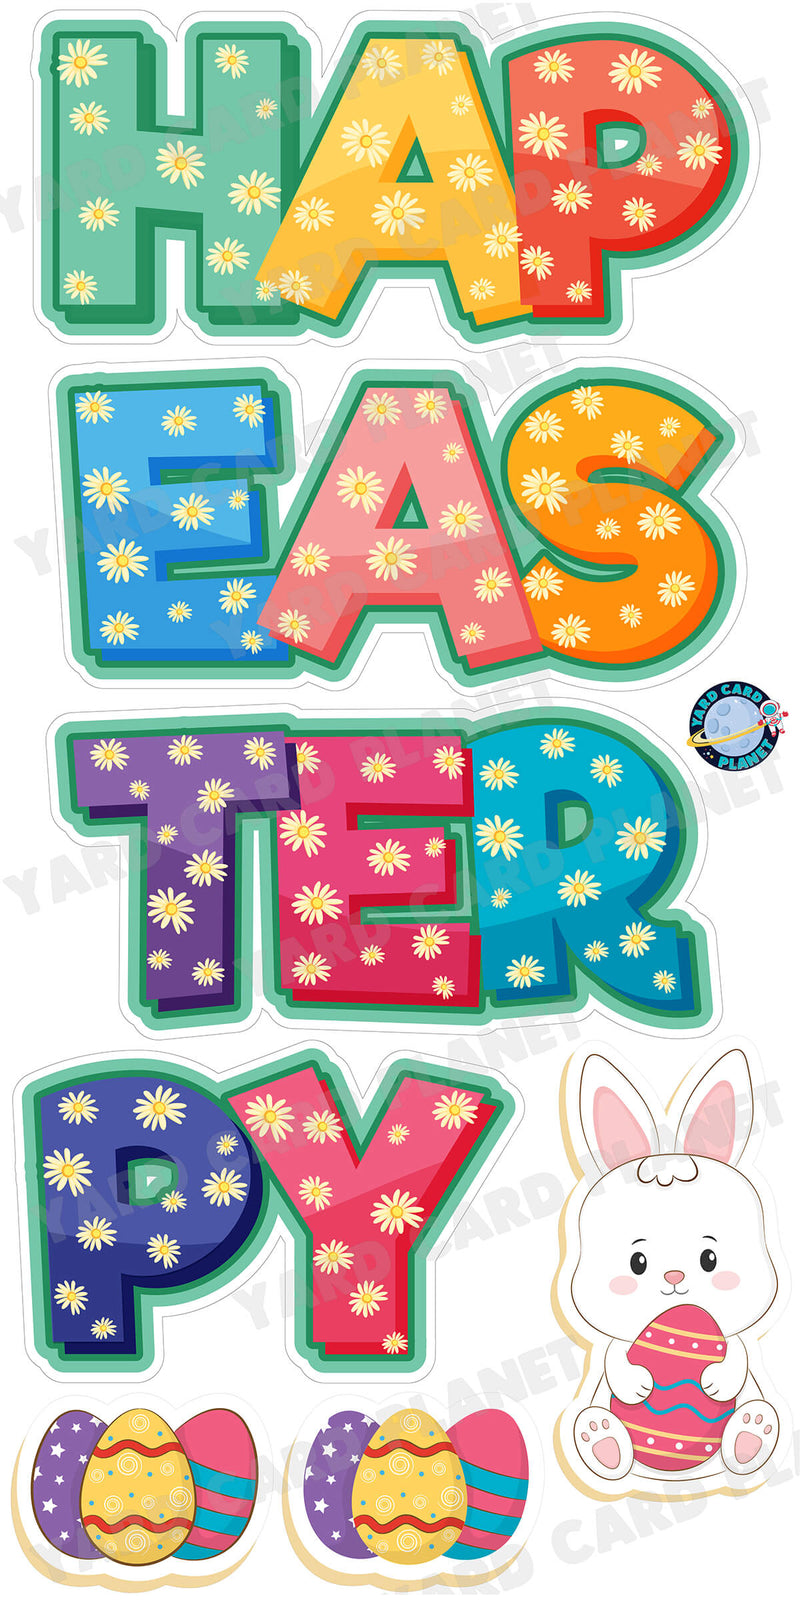 Happy Easter Floral EZ Quick Set and Yard Card Flair Set